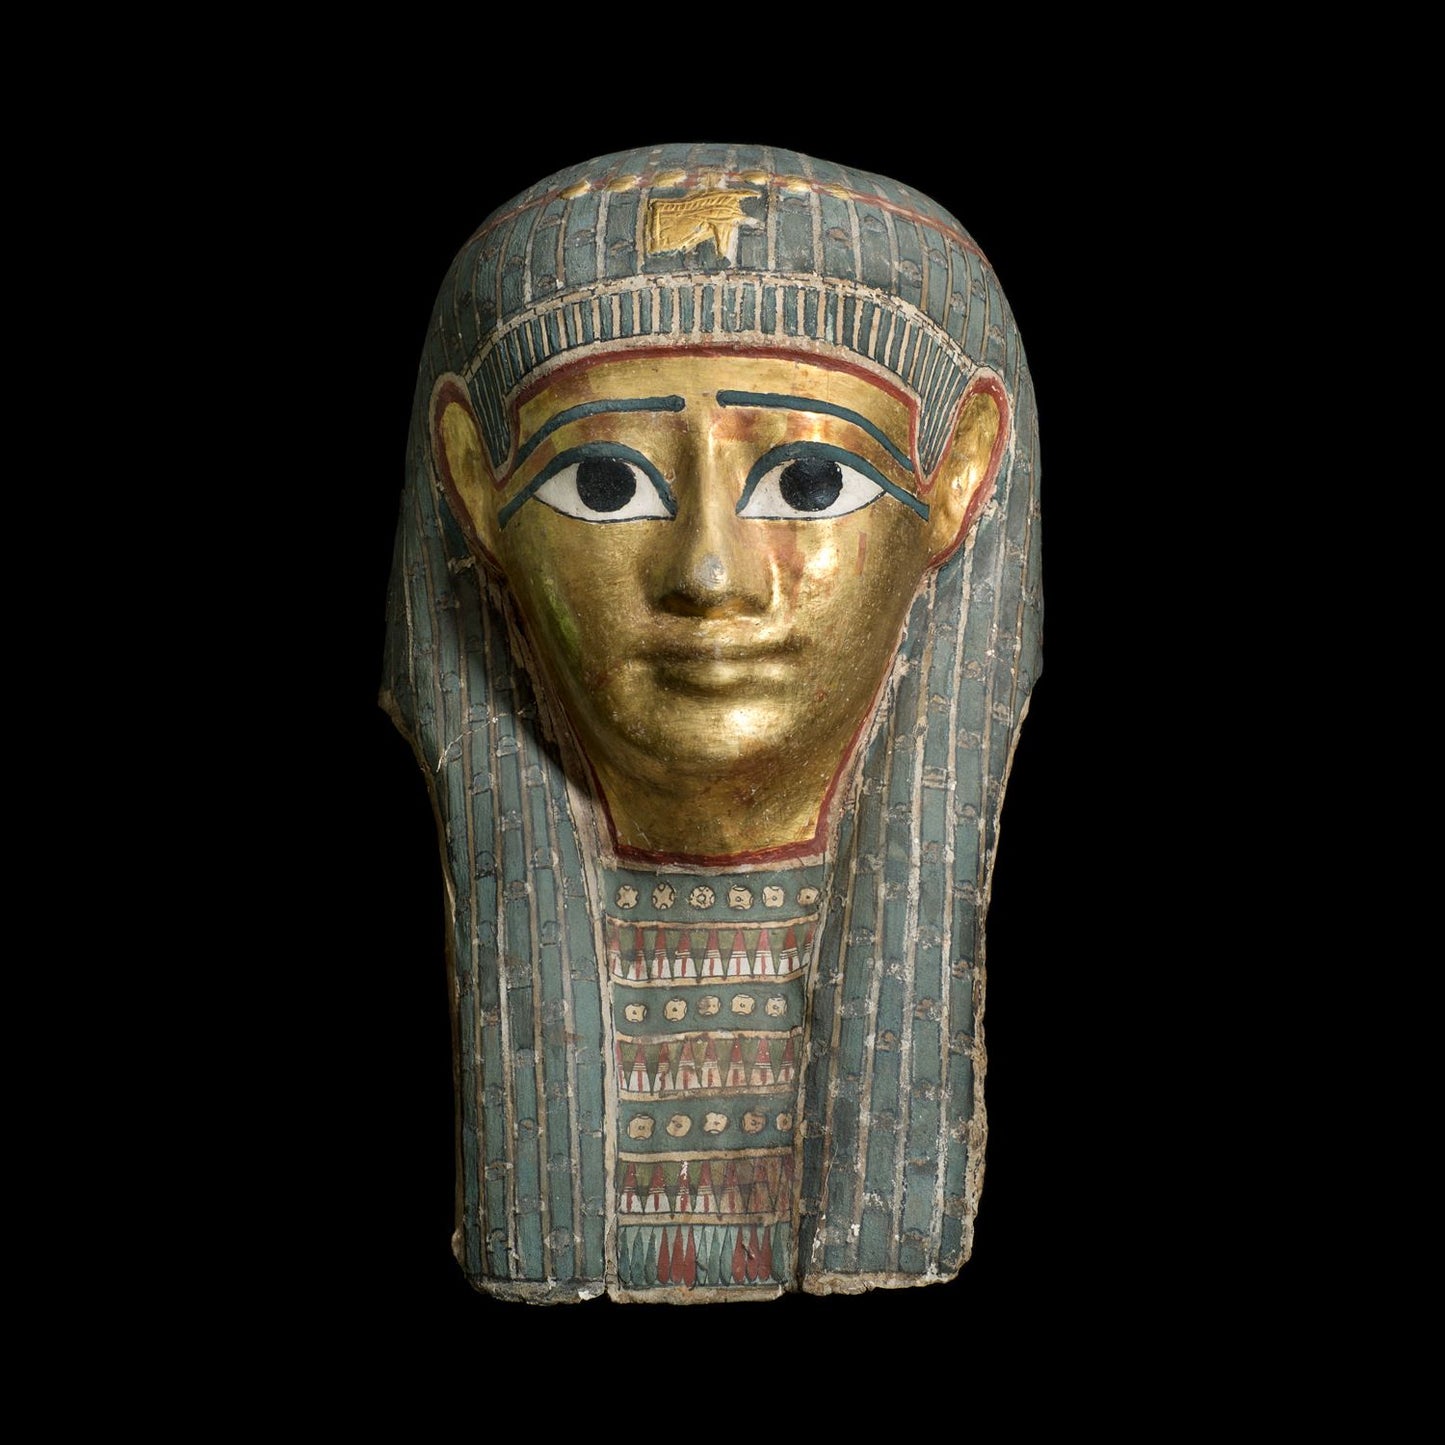 Golden mummy mask with blue and red decorative panels from the neck down. Black backdrop.